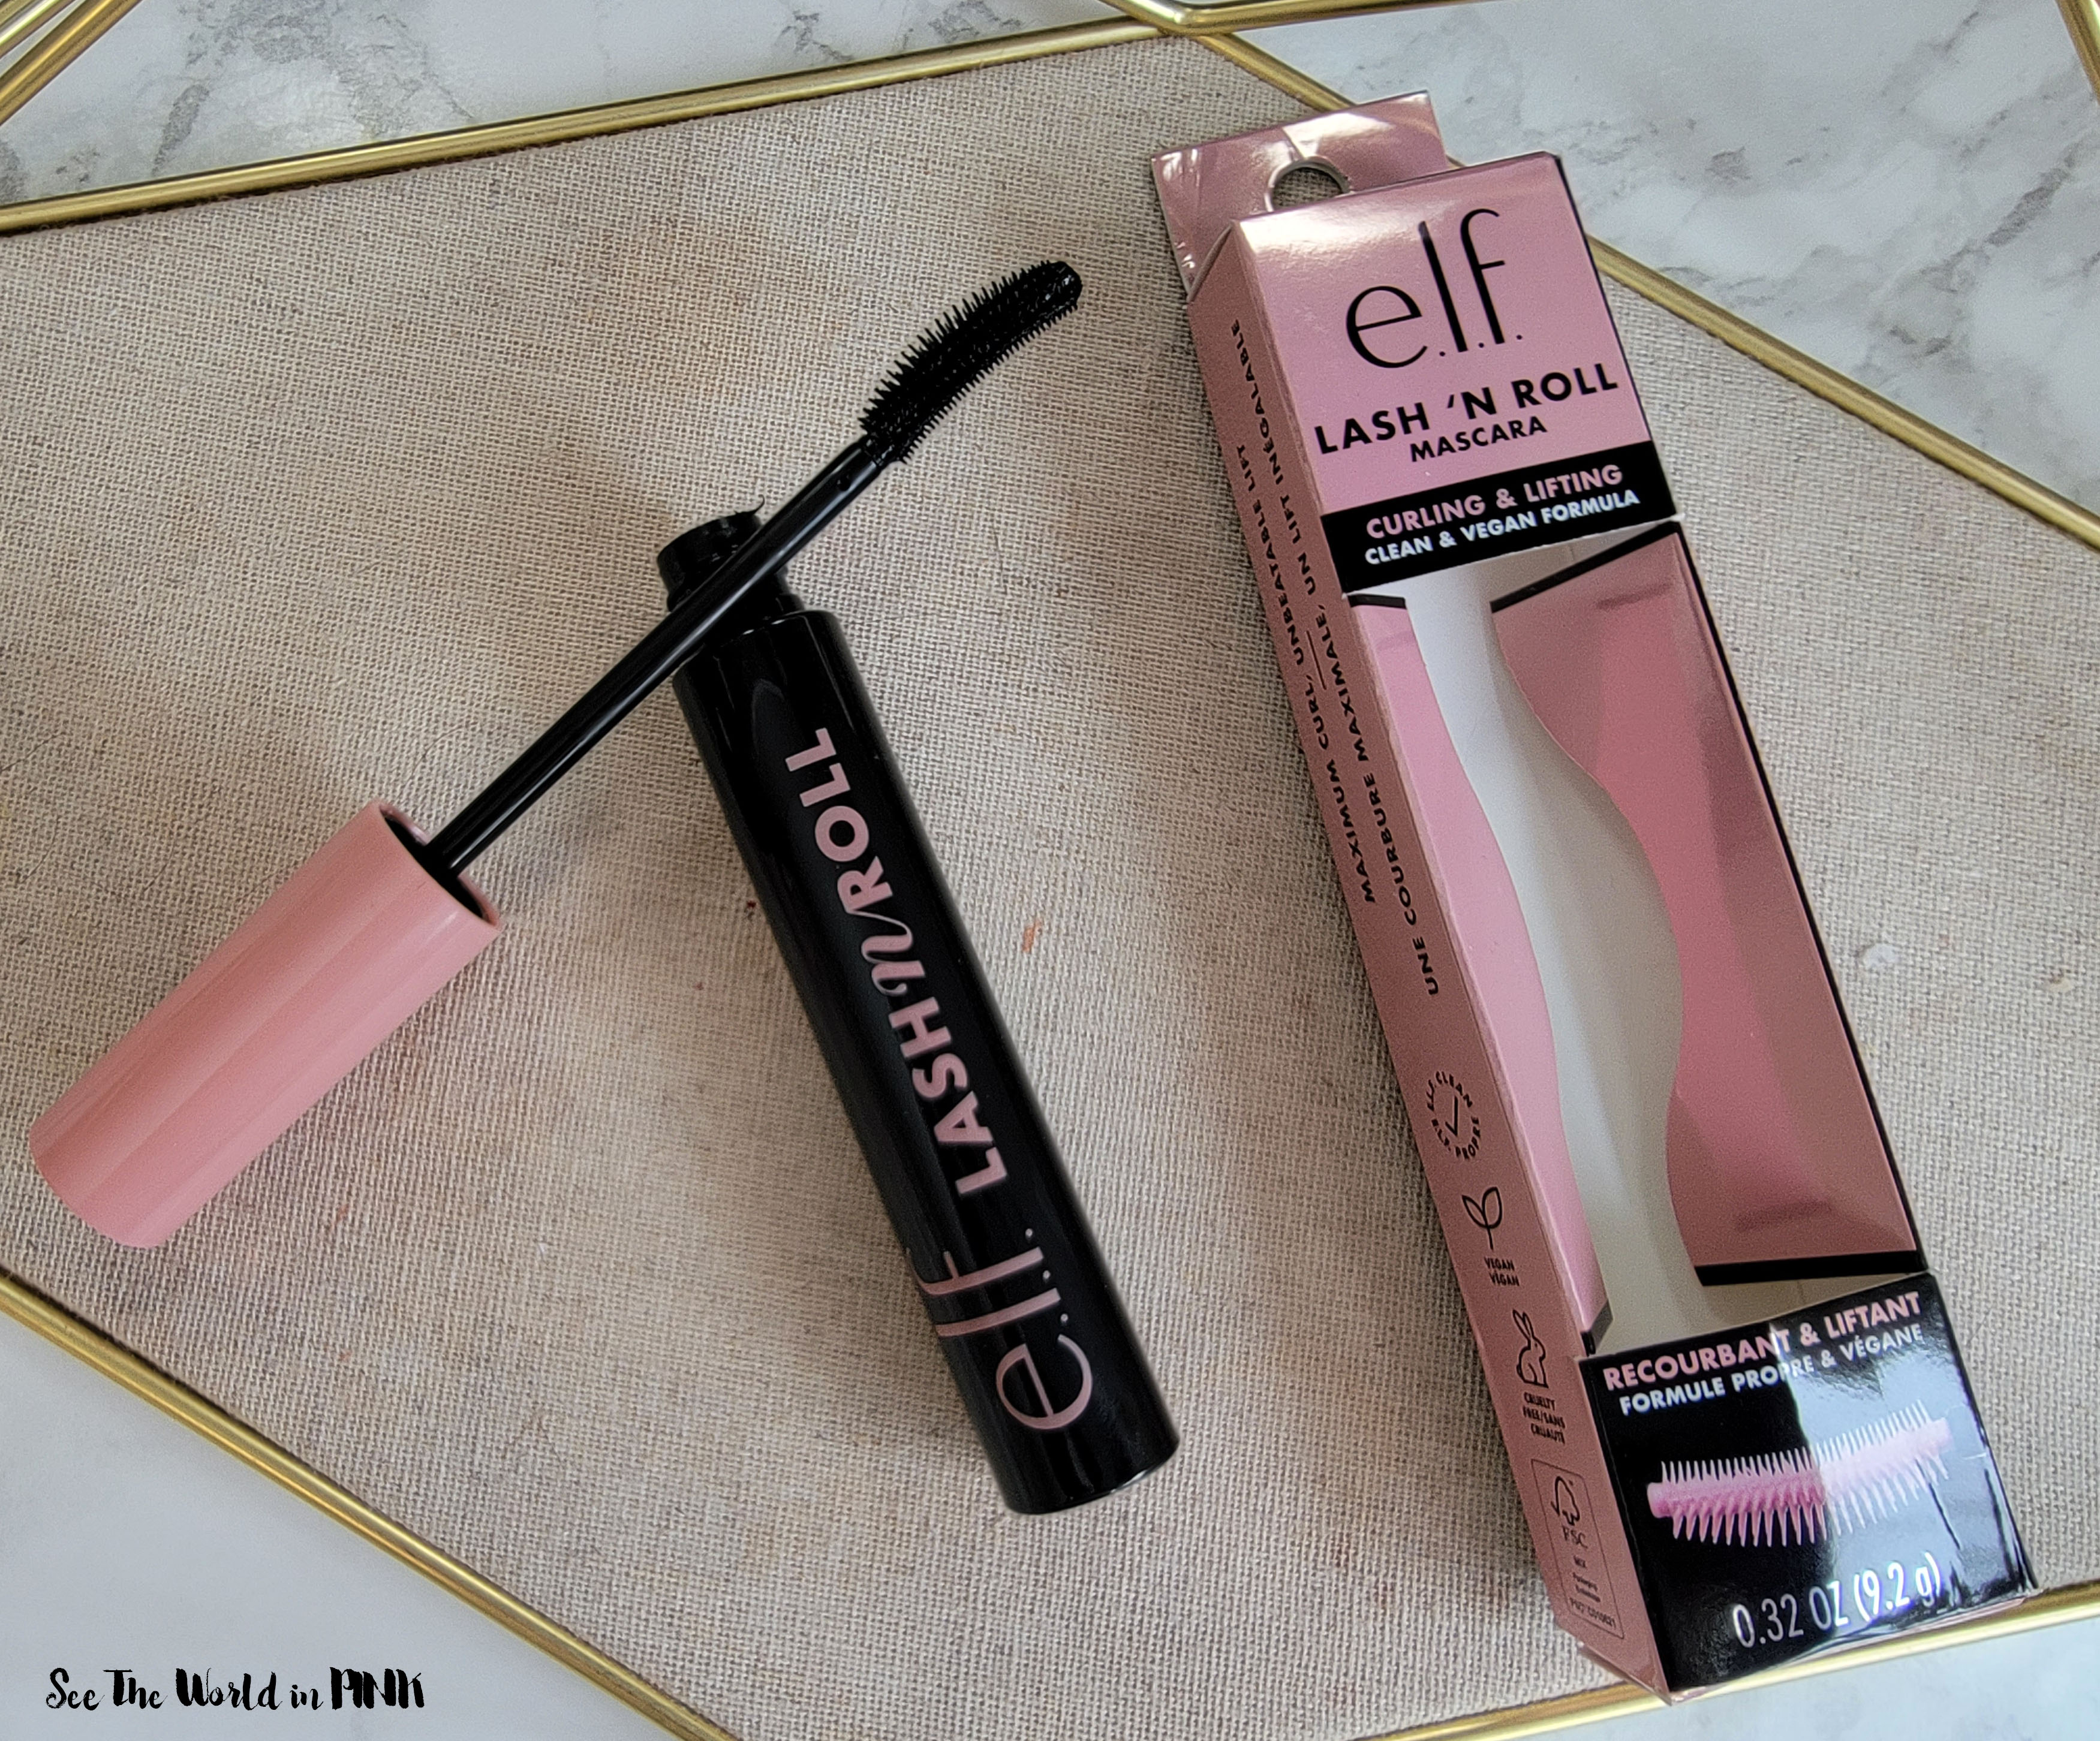 Glowing With New ELF Products - Whoa Glow SPF, Halo Glow Liquid Filter, Halo Glow Blush and Highlighter Beauty Wand, Lip Lacquer, and Lash 'N Roll Mascara